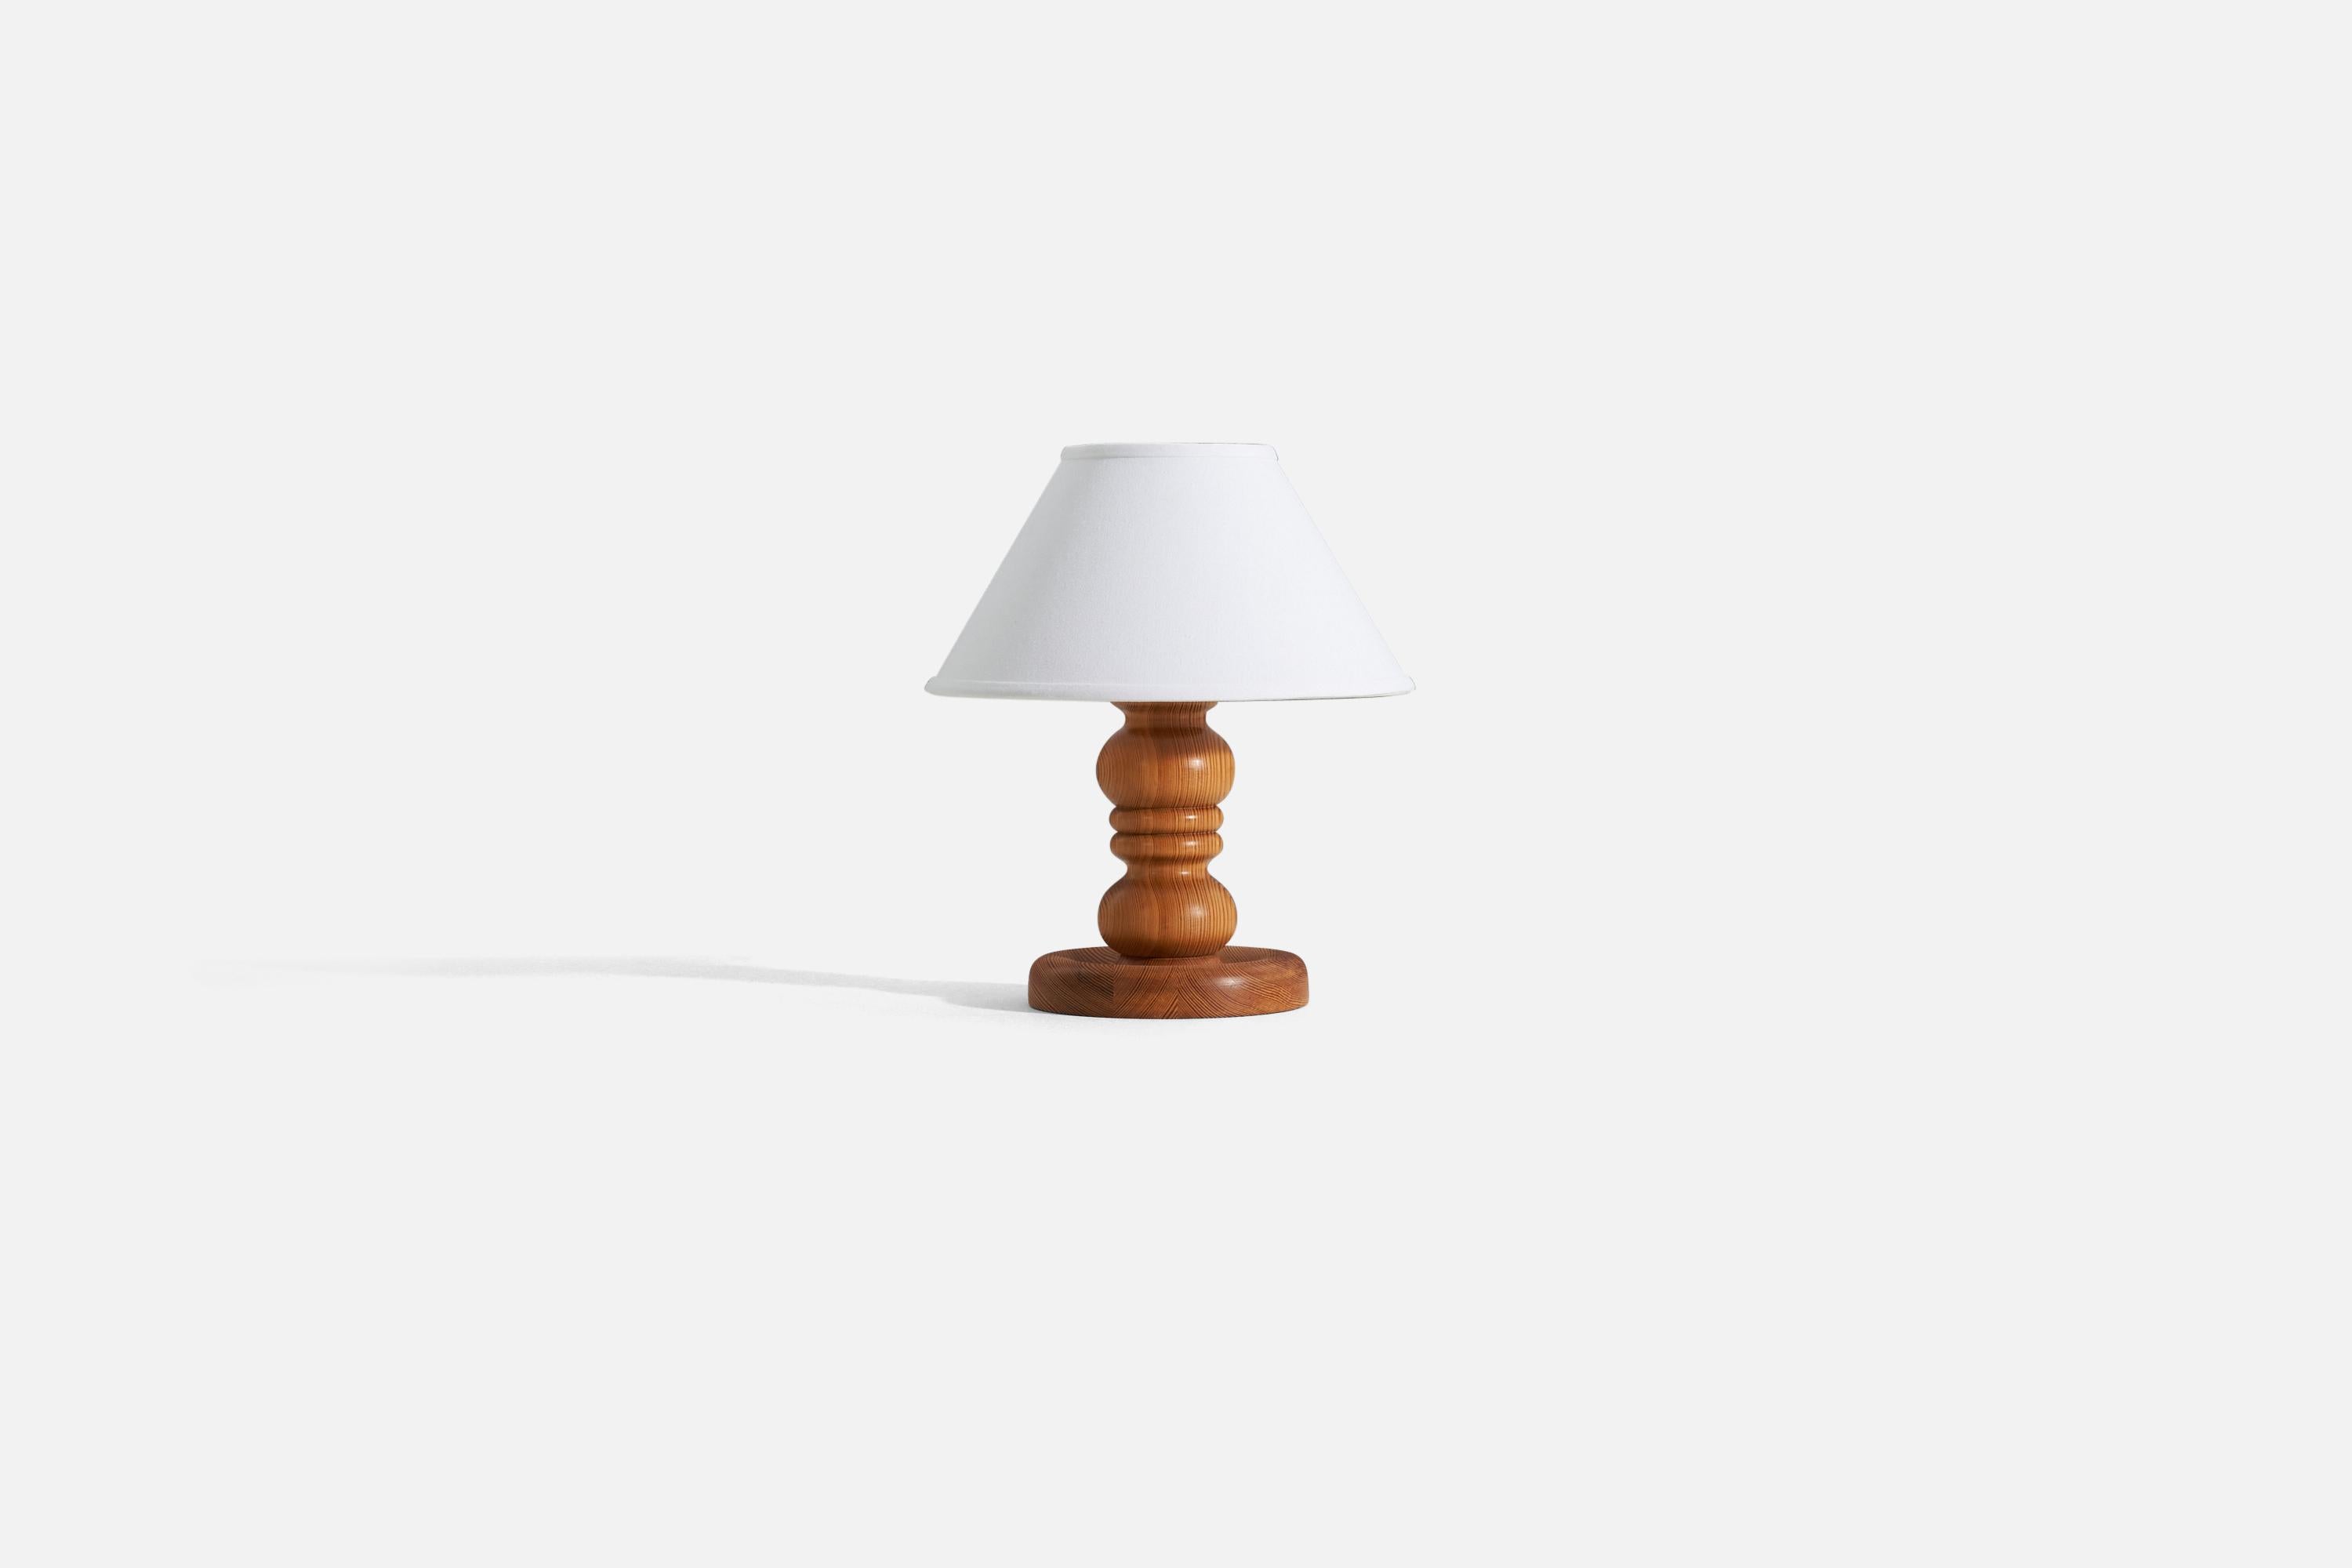 A solid, turned pine table lamp produced in Sweden, 1970s.

Sold without lampshade. 
Dimensions of Lamp (inches) : 11 x 7 x 7 (H x W x D)
Dimensions of Shade (inches) : 5 x 12.25 x 7.25 (T x B x H)
Dimension of Lamp with shade (inches) : 14.25